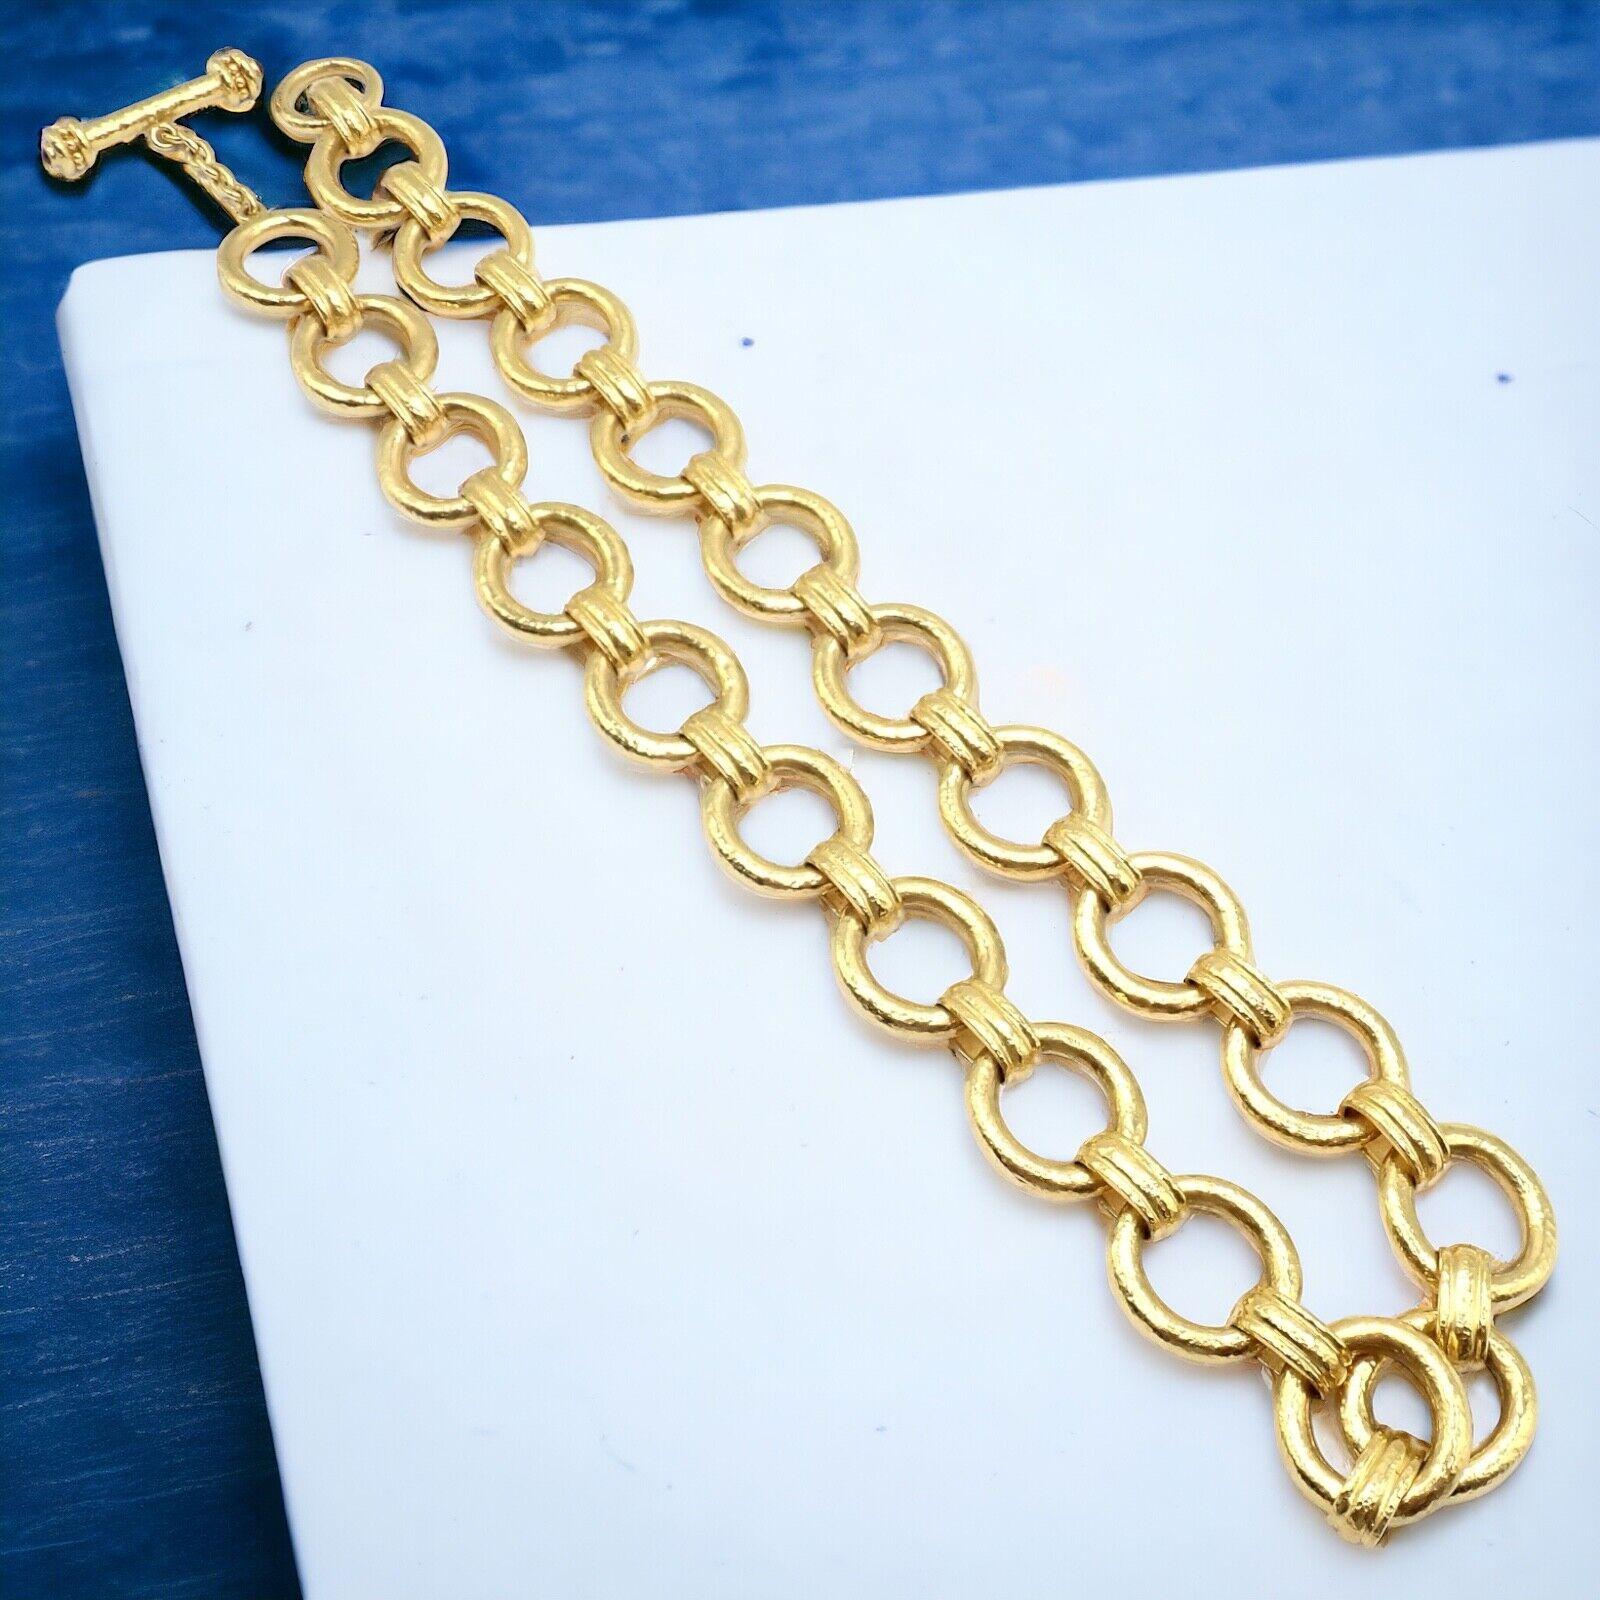 19k Yellow Gold Link Necklace by Elizabeth Locke. 
The Elizabeth Locke 19k yellow gold necklace features a luxurious toggle link design, stretching 21 inches in length. 
Embellished with rich, radiant rubies at the toggle.
This piece epitomizes